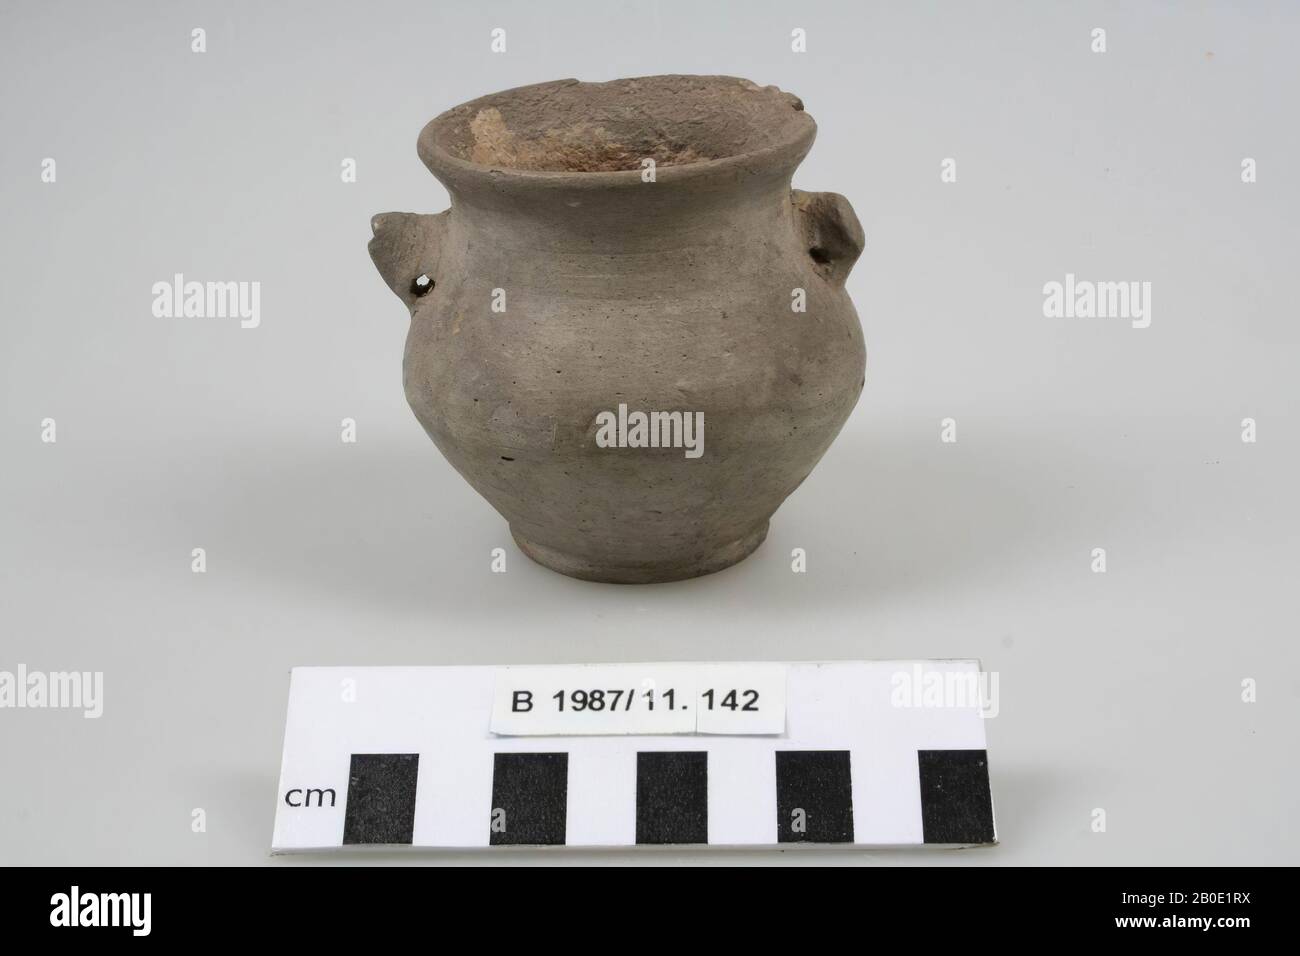 An earthenware pot with a disk base. The wall slopes diagonally upwards to a round bend. Above the bend, the wall slopes inwardly upwards to a short wide neck with an outwardly curved and rounded edge. Two lobe handles are placed on the shoulders. The pot is light gray polished., Crockery, earthenware, H 7.8 cm, D 8.2 cm, D edge 7 cm, Iron Age 1200-600 BC, Iran Stock Photo